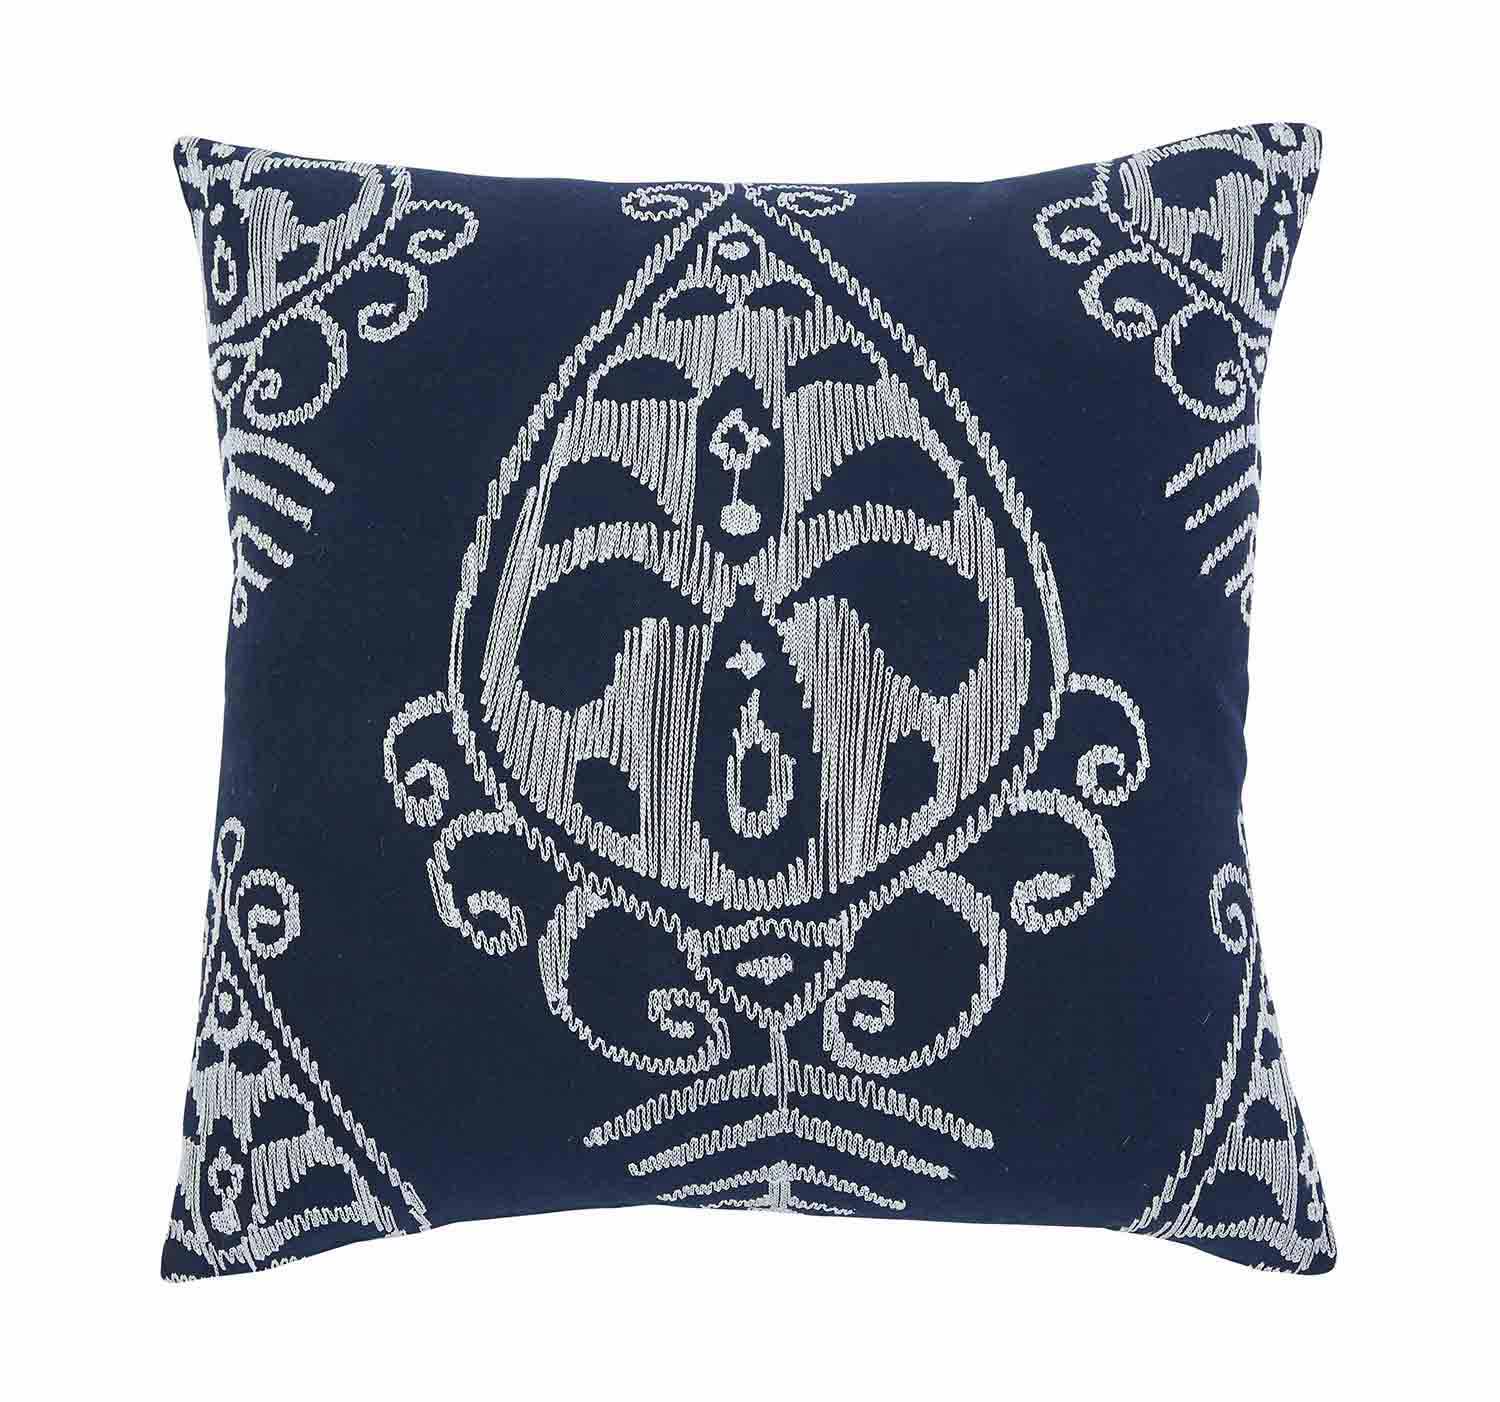 Ashley Embroidered Pillow Cover - Set of 4 - Navy